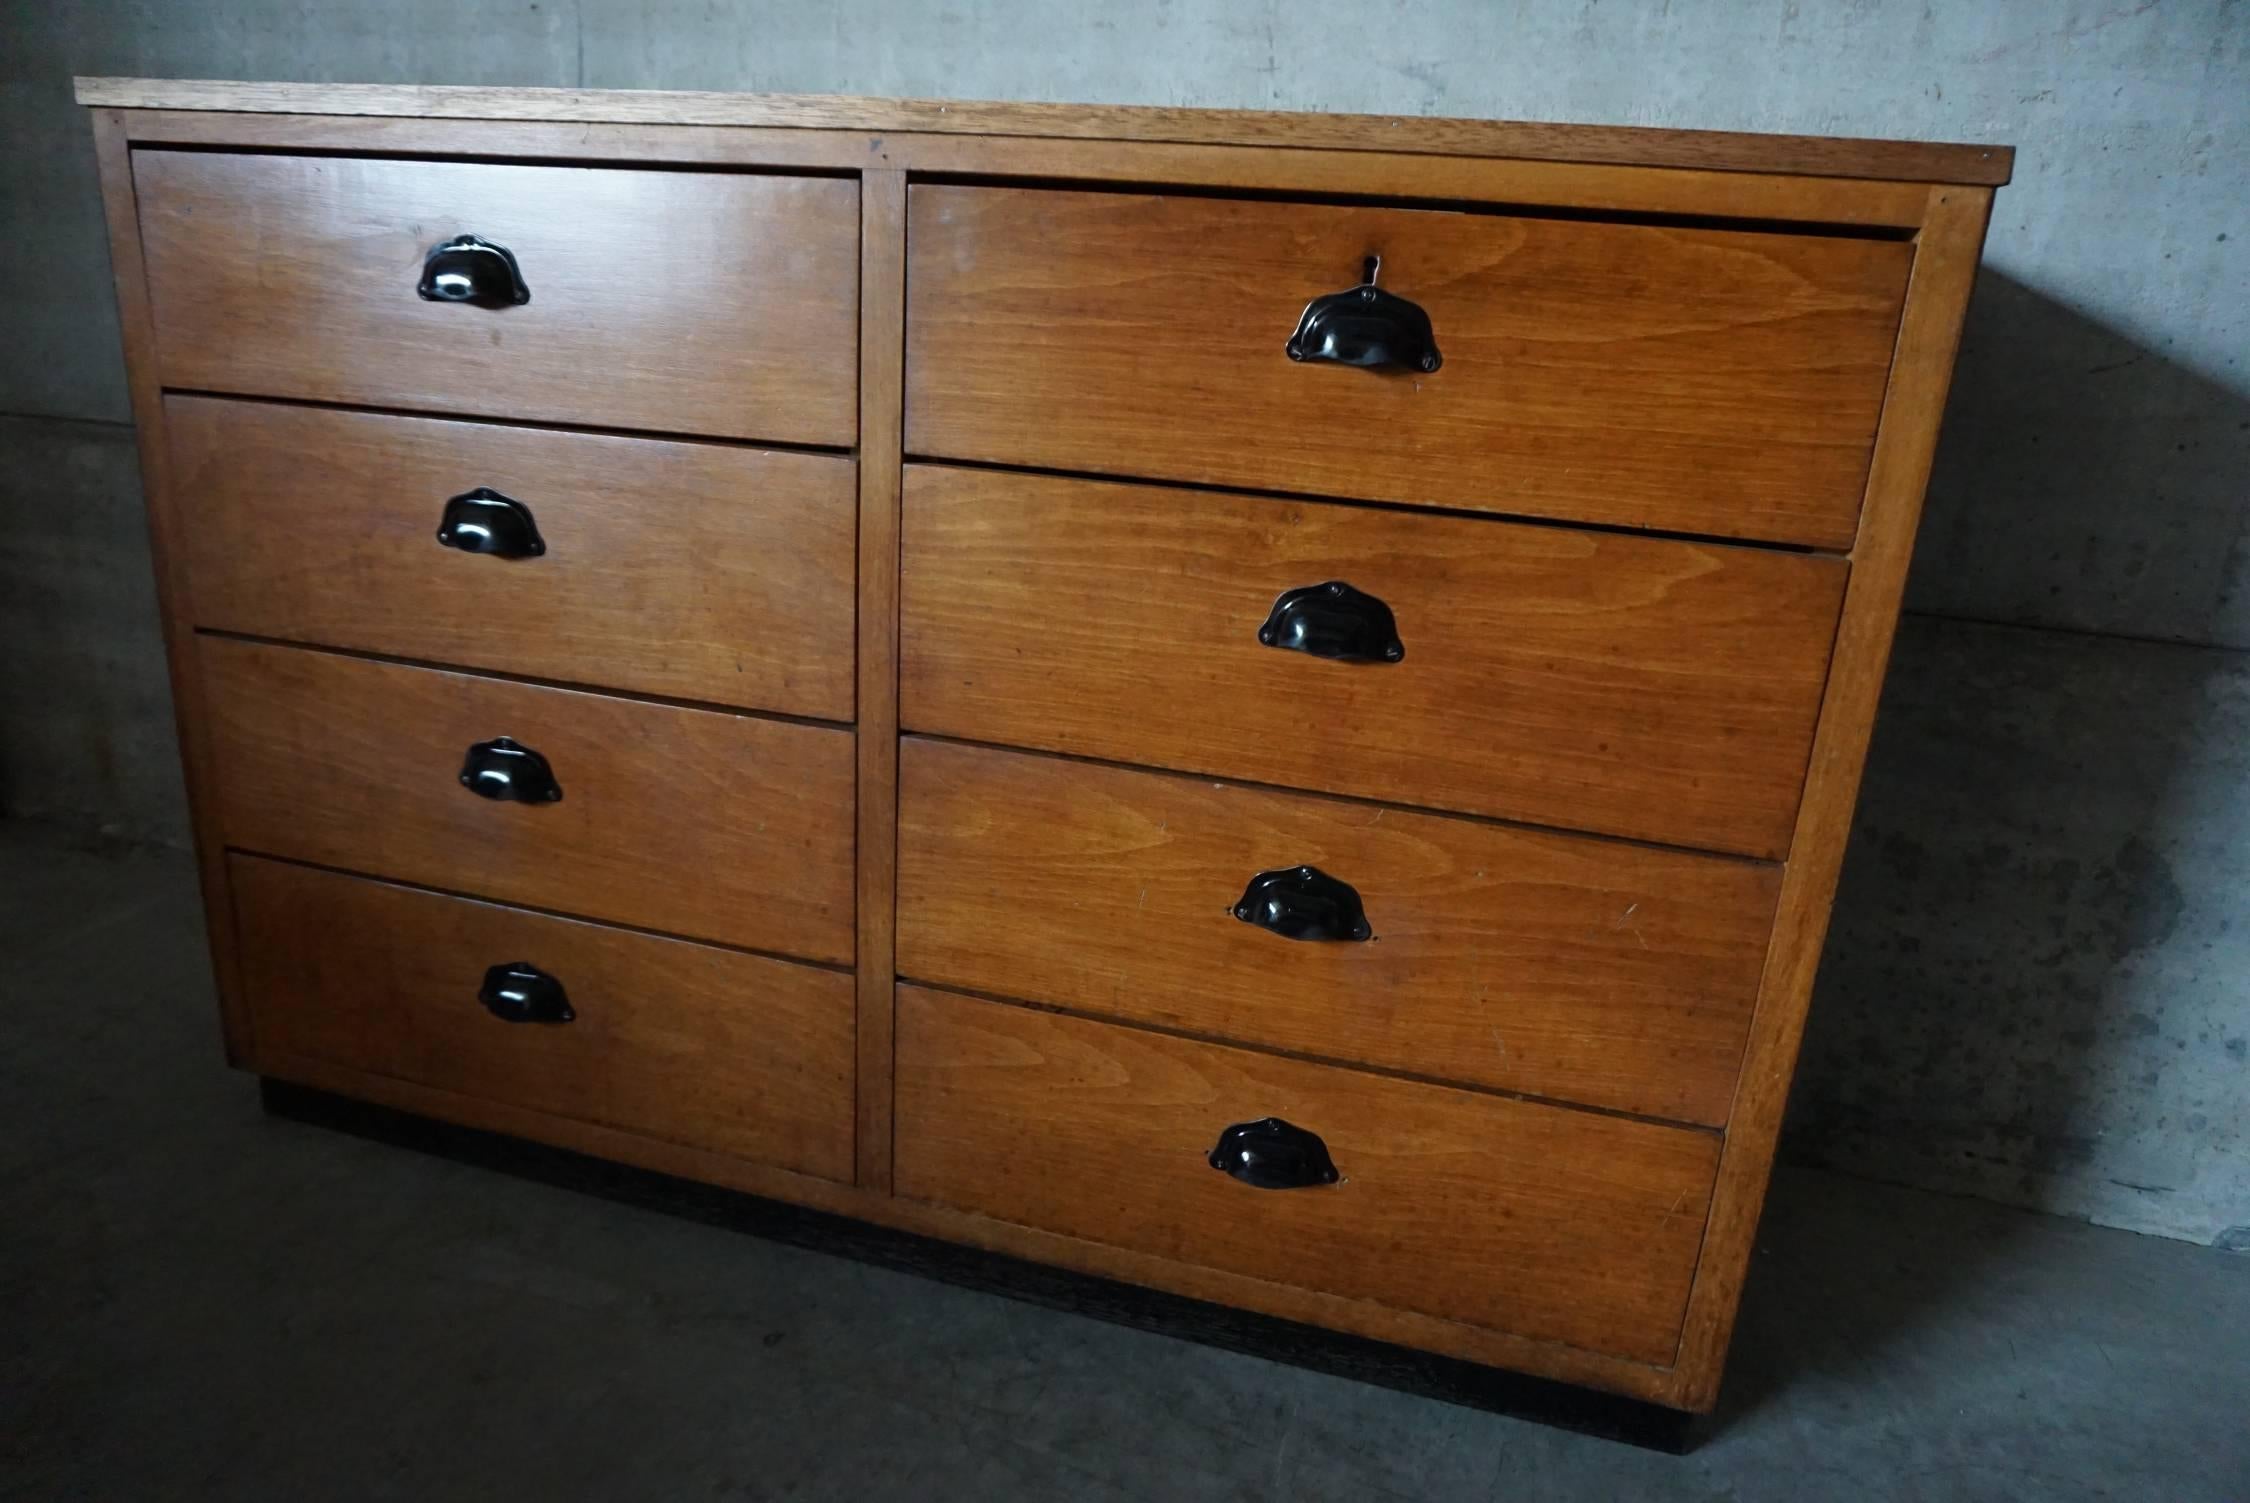 This apothecary bank of drawers was designed and made around the 1950s. The piece is made from oak fronts with cup handles.